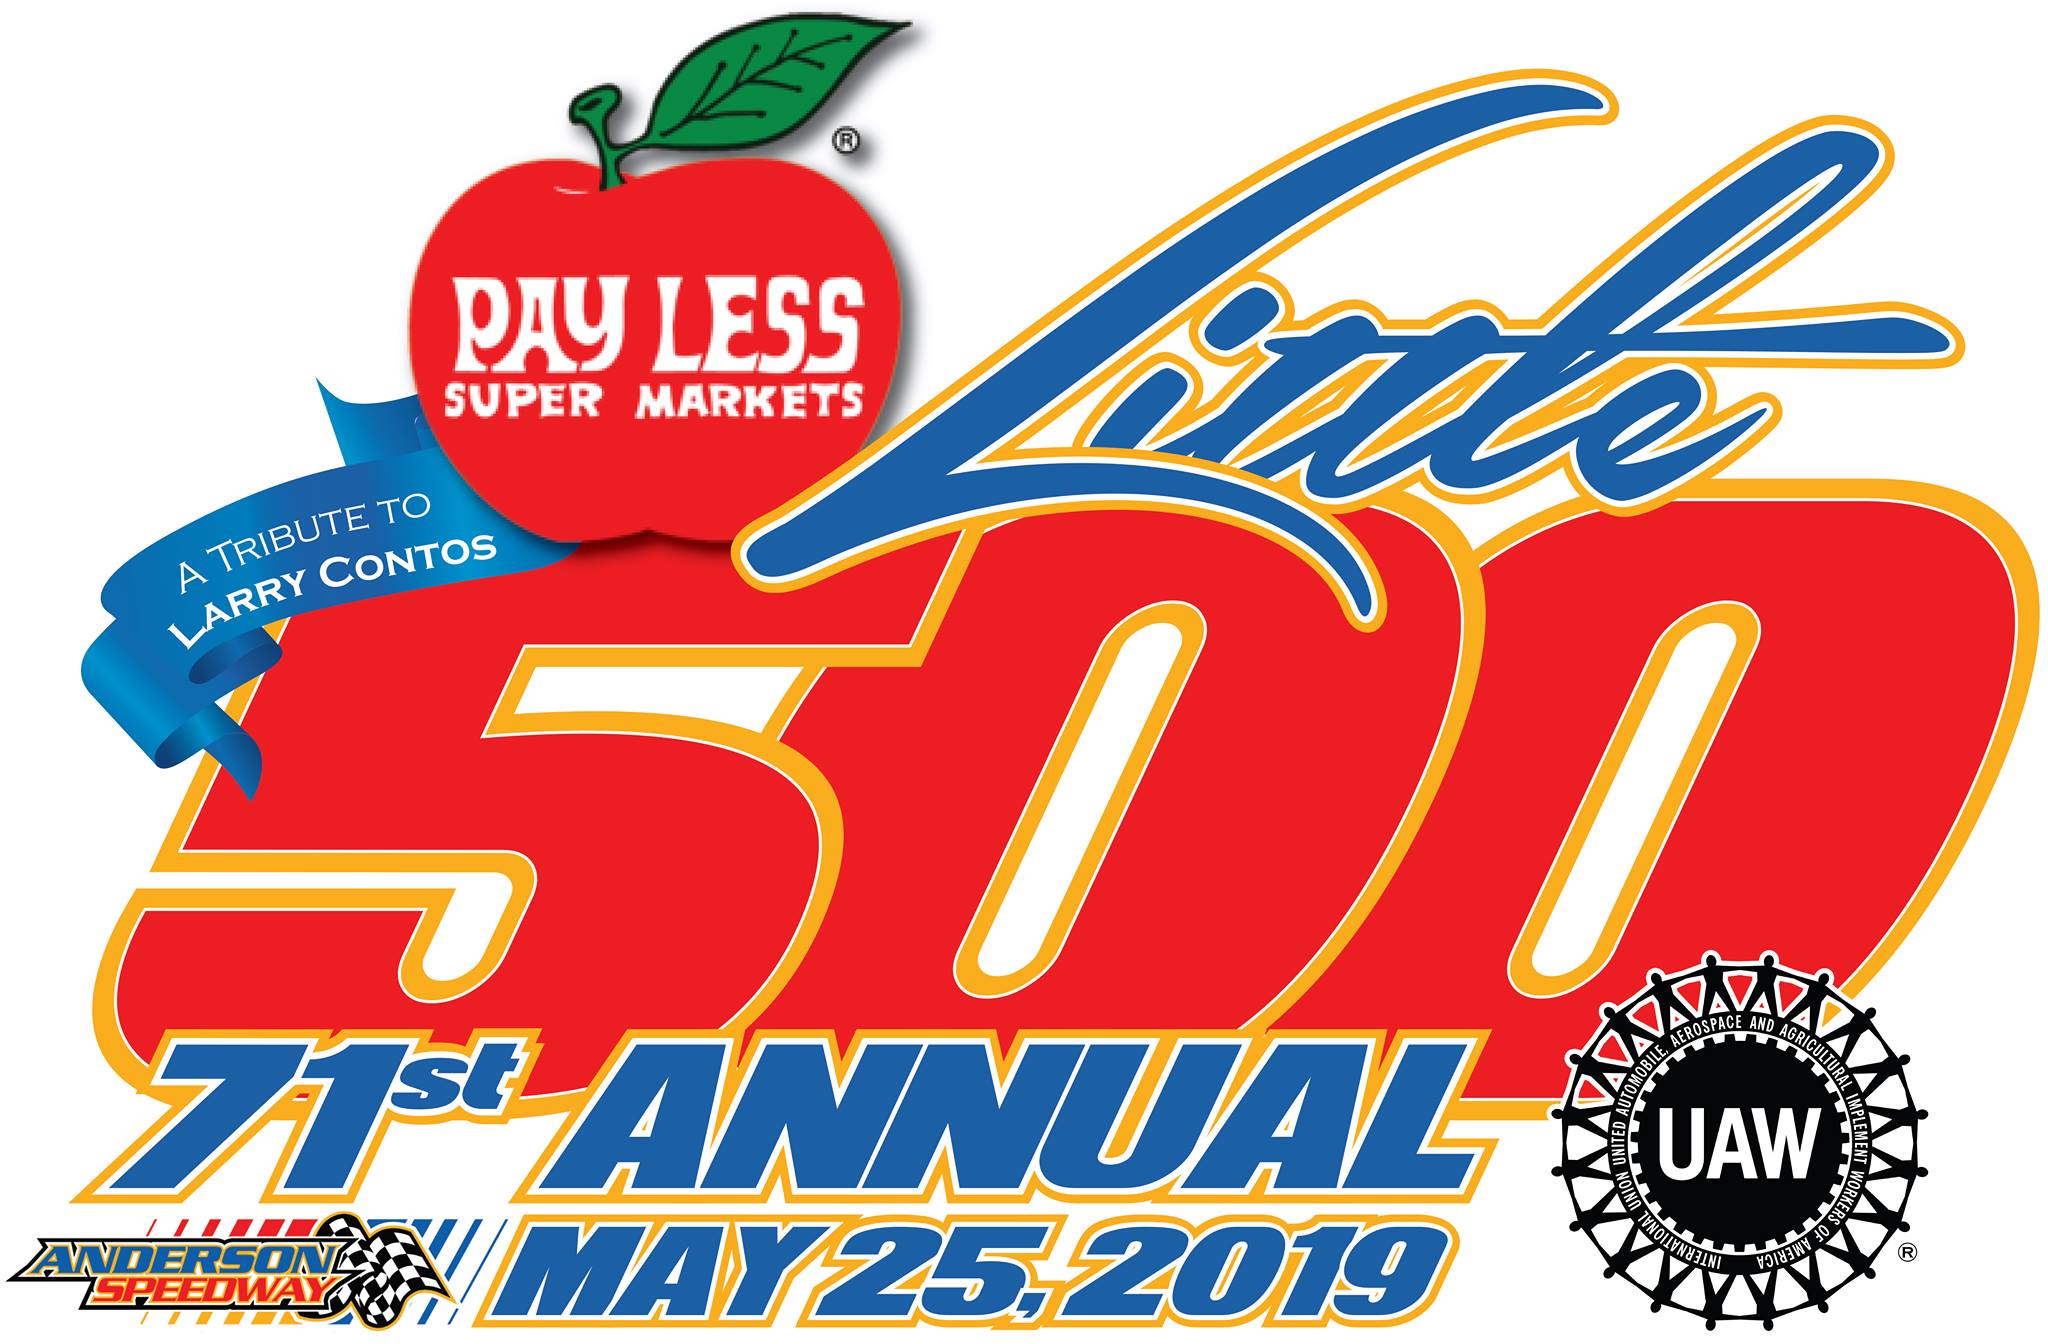 Final Qualifying Results for the Pay Less Little 500 presented by UAW